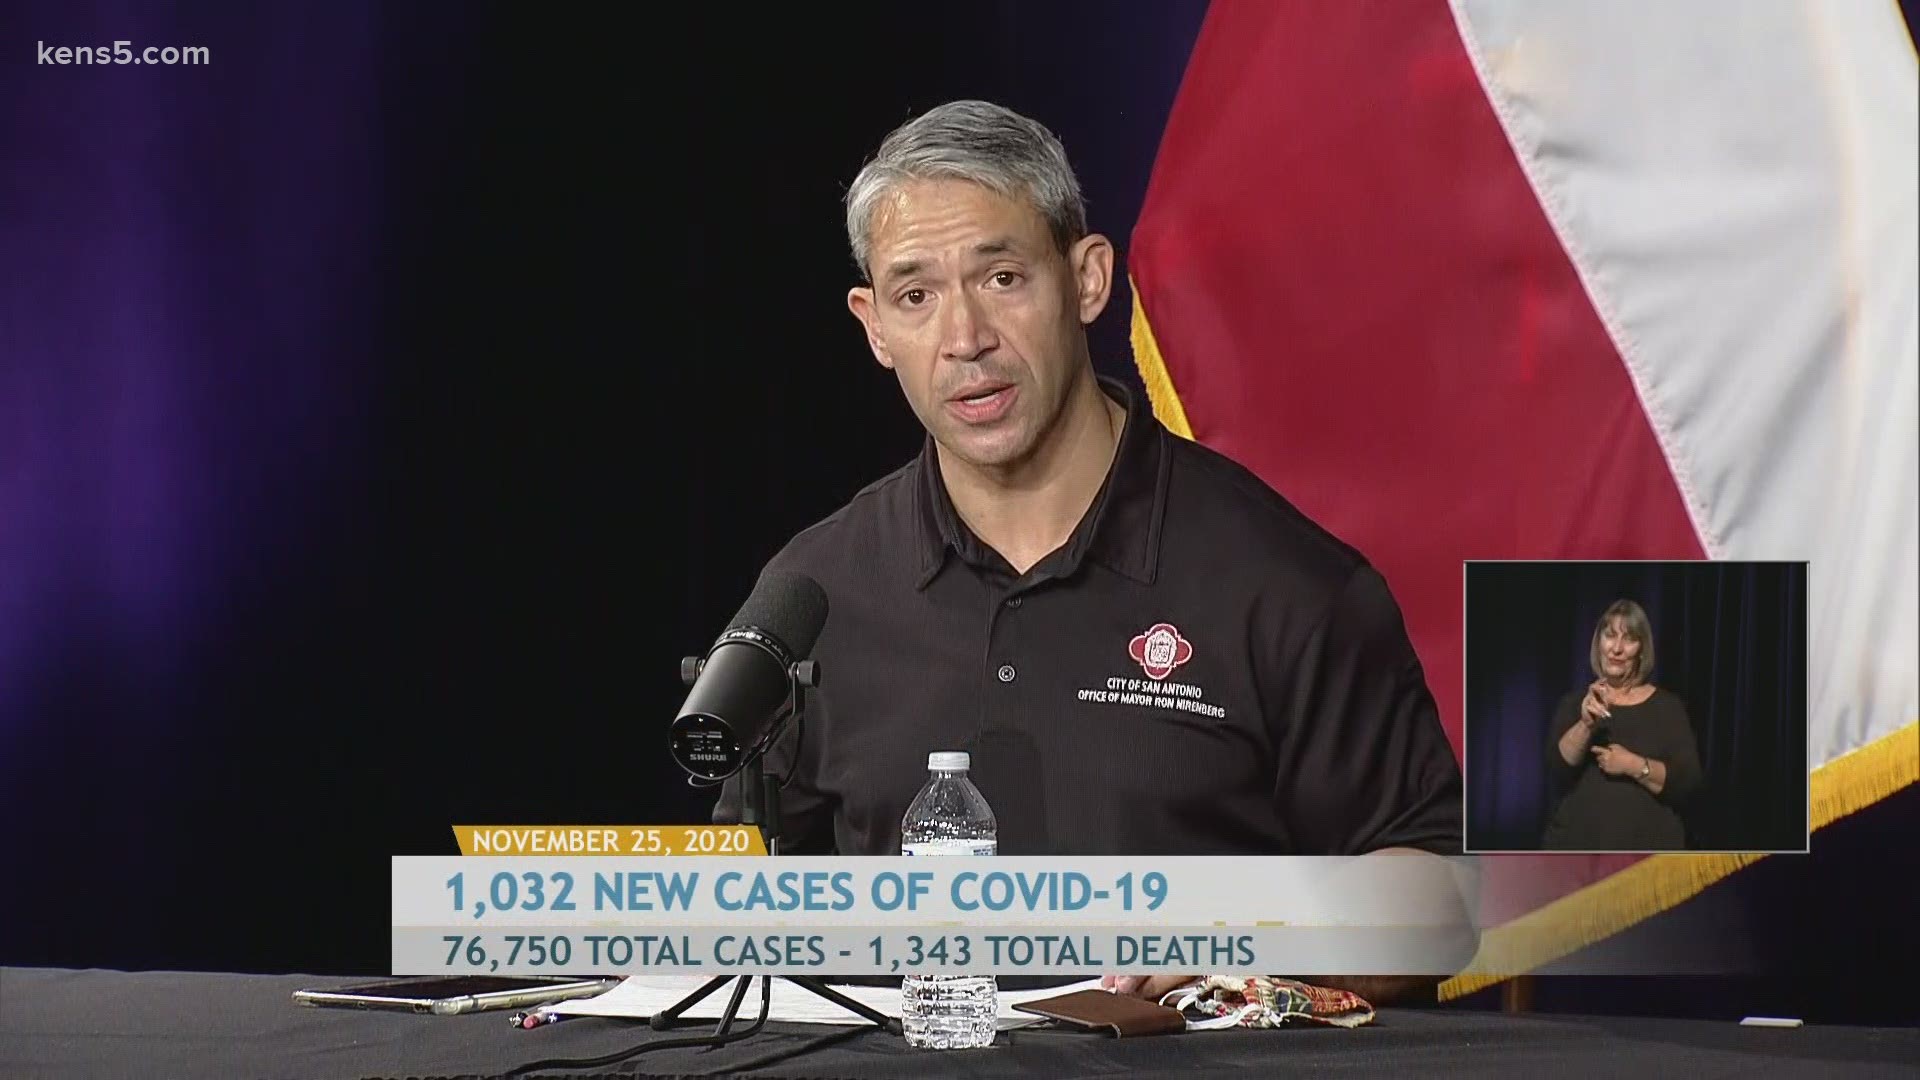 Mayor Nirenberg reported 1,032 new coronavirus cases, bringing the total to 76,750. 6 new deaths were reported, raising the death toll to 1,343 in the county.